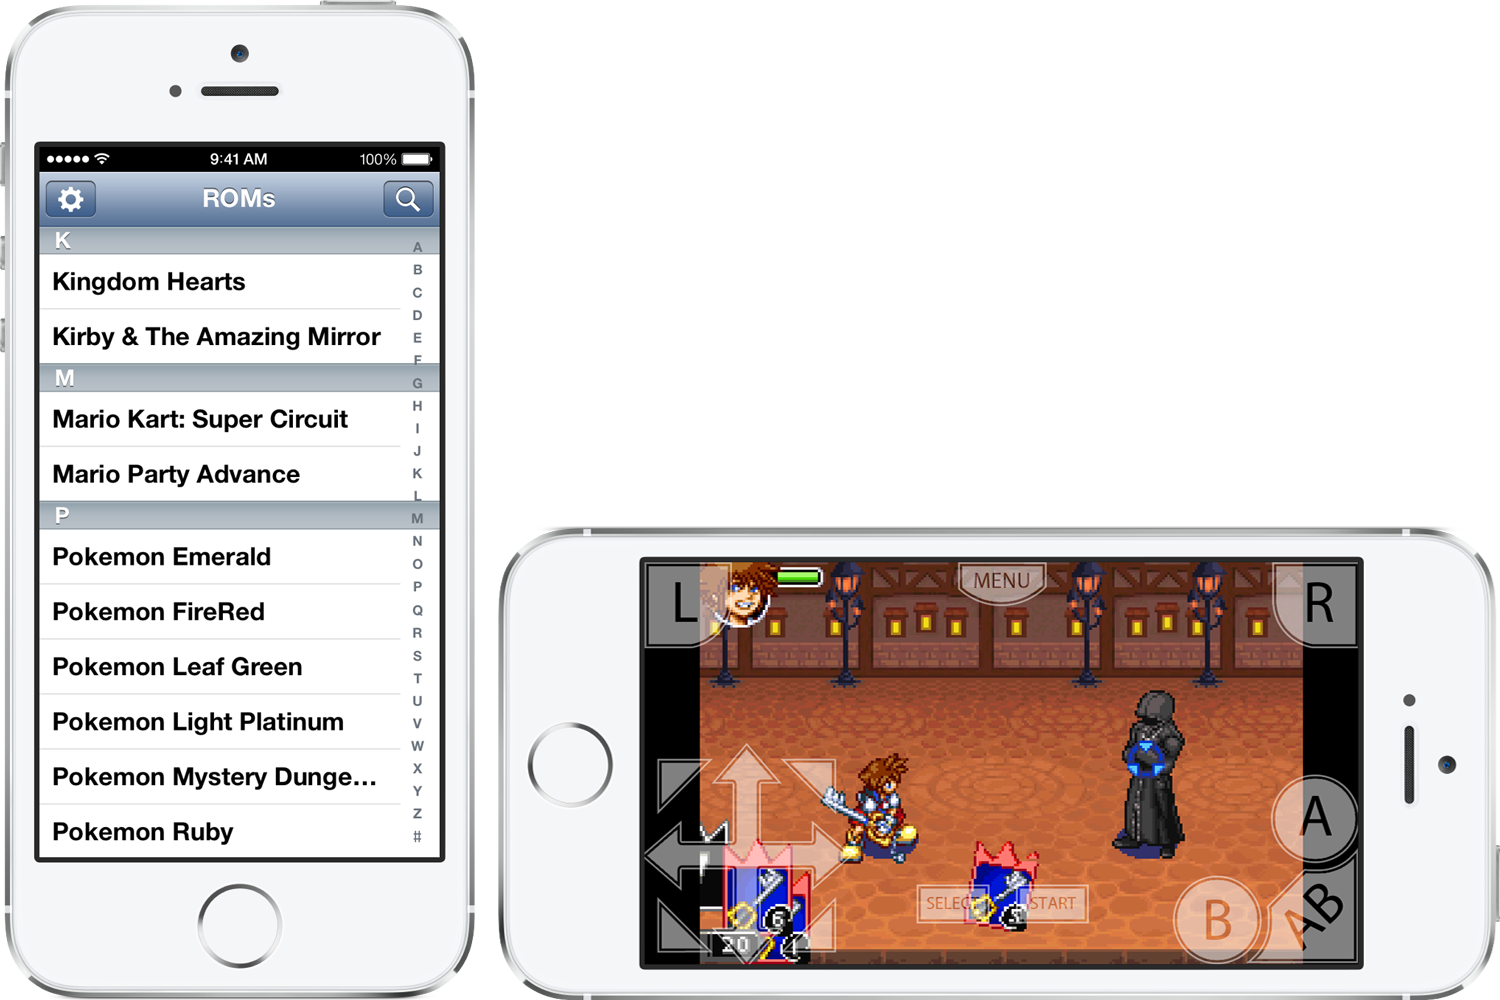 GBA emulator for iOS (Download IPA) GameBoy Advance